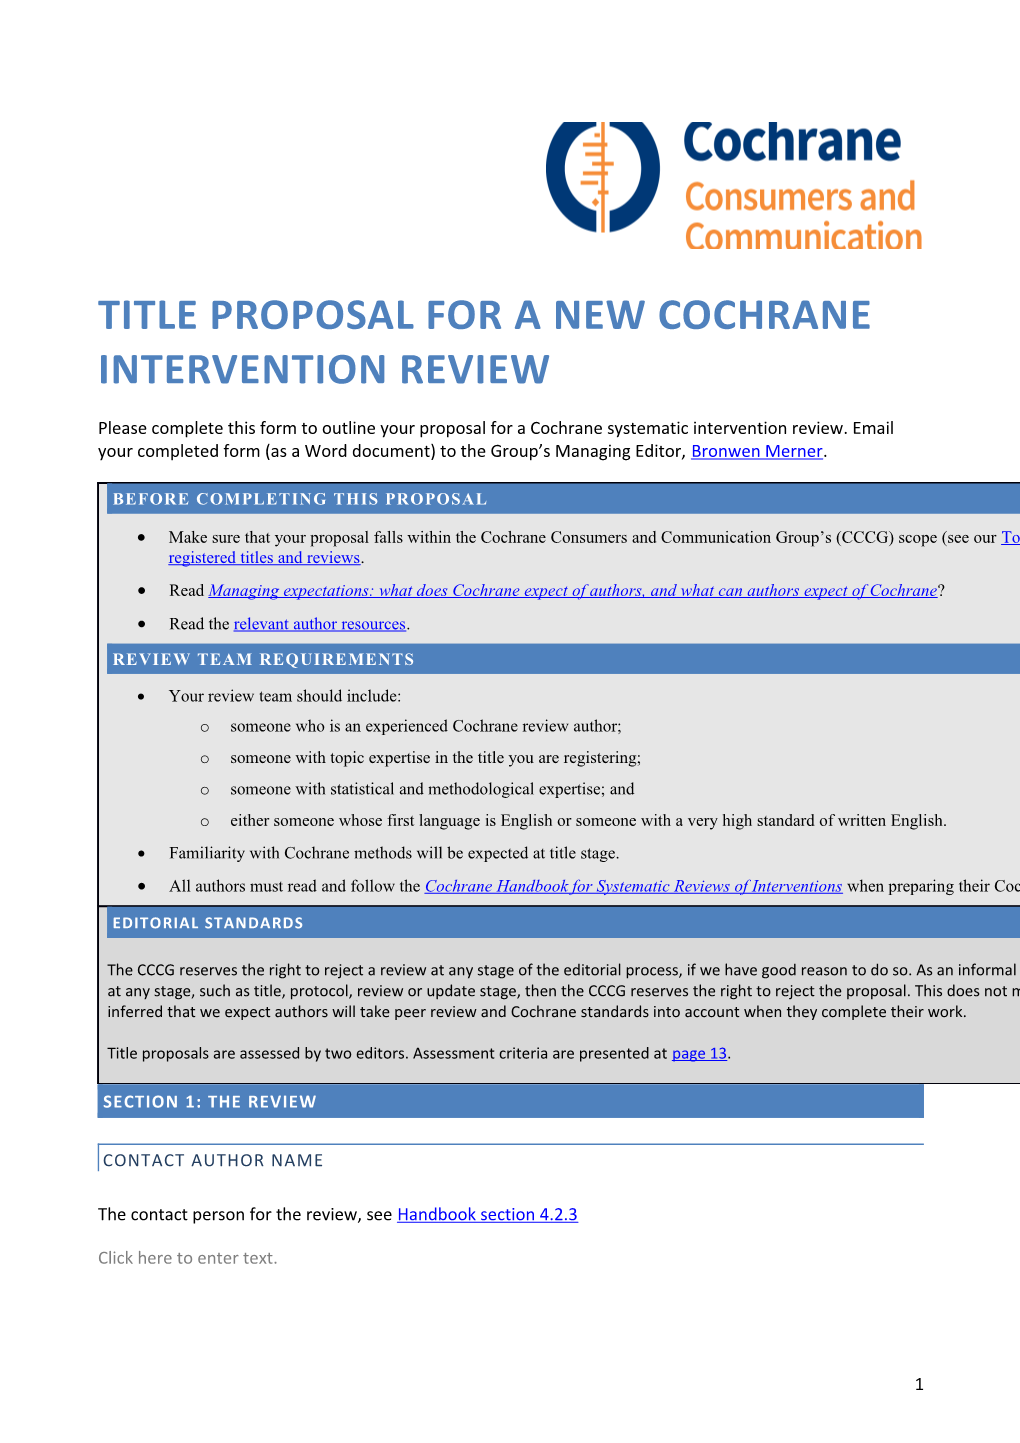 Title PROPOSAL for a NEW COCHRANE INTERVENTION REVIEW